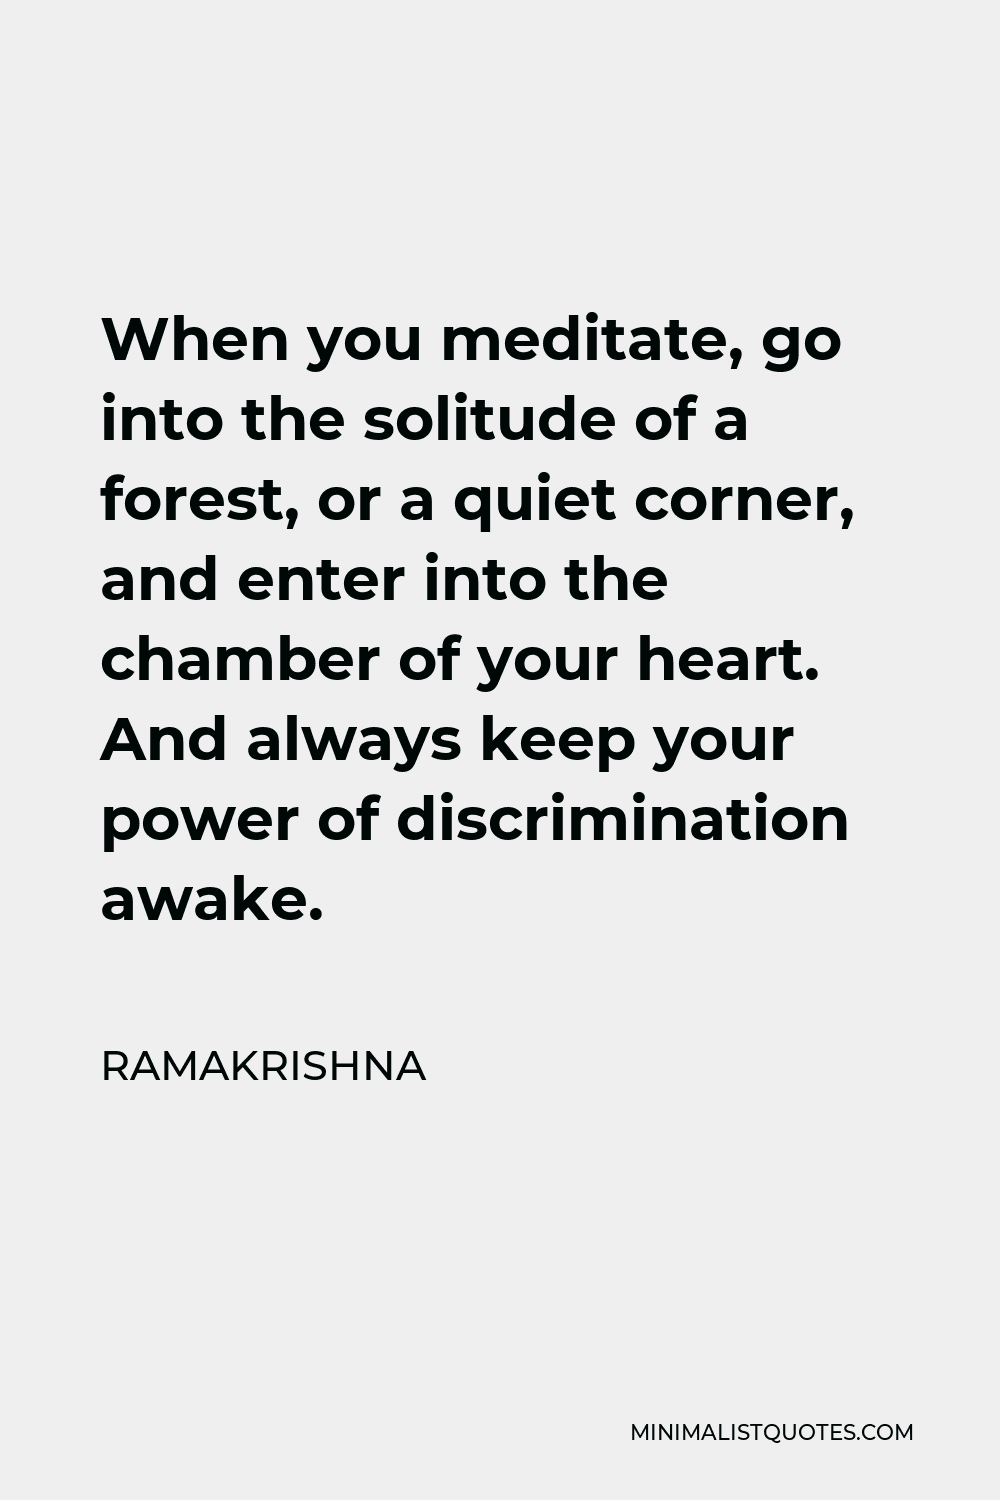 Ramakrishna Quote - When you meditate, go into the solitude of a forest, or a quiet corner, and enter into the chamber of your heart. And always keep your power of discrimination awake.